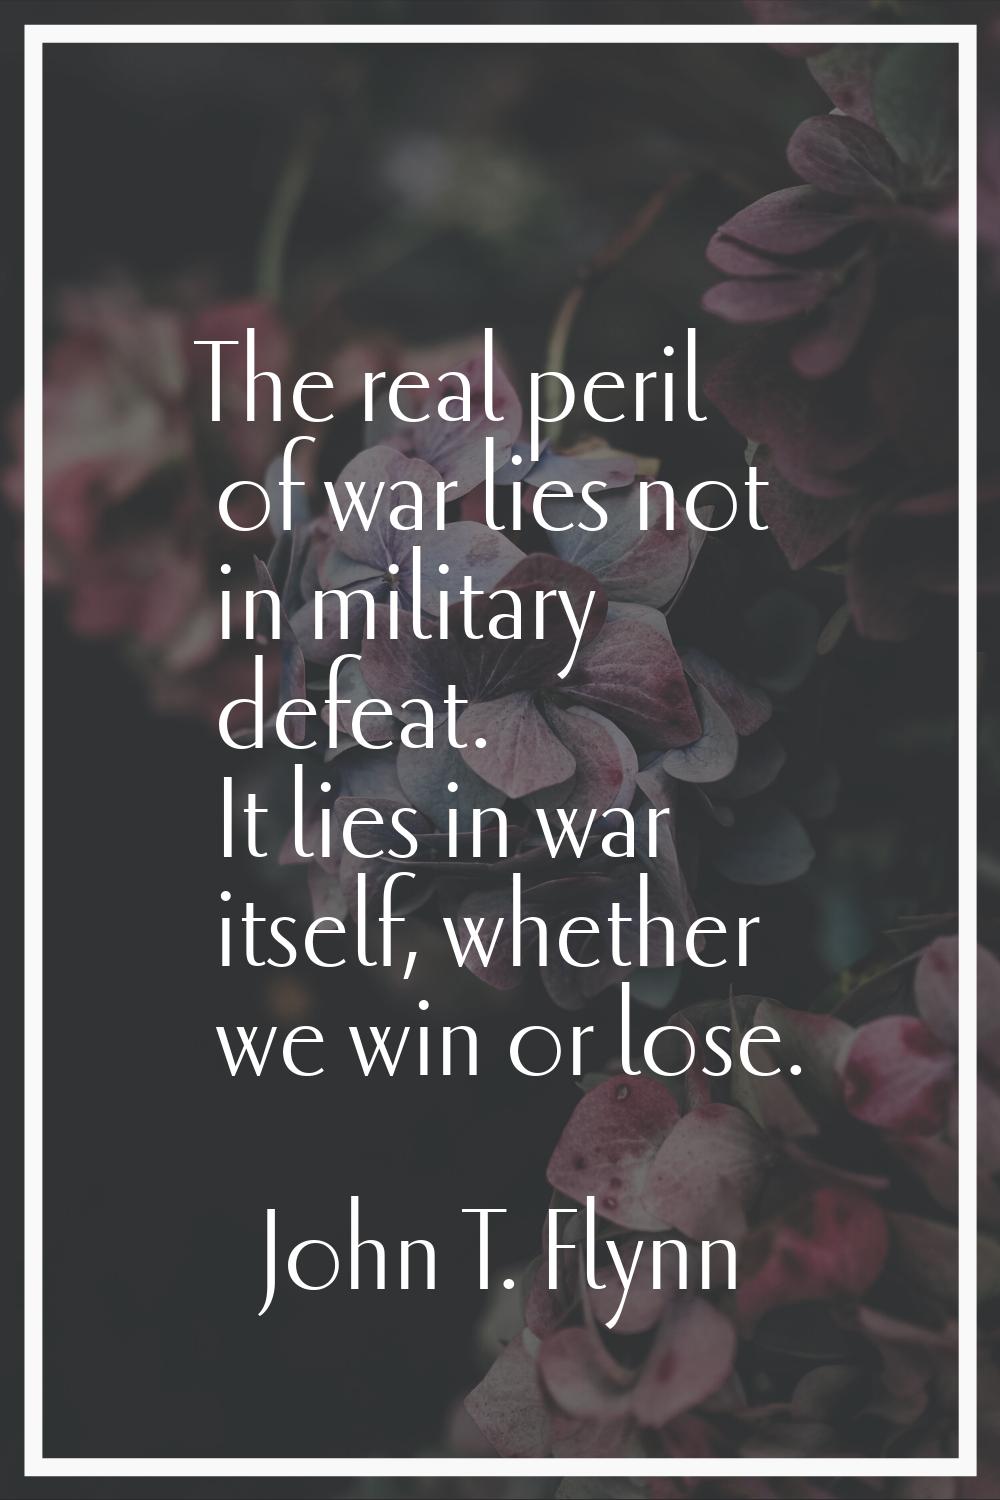 The real peril of war lies not in military defeat. It lies in war itself, whether we win or lose.